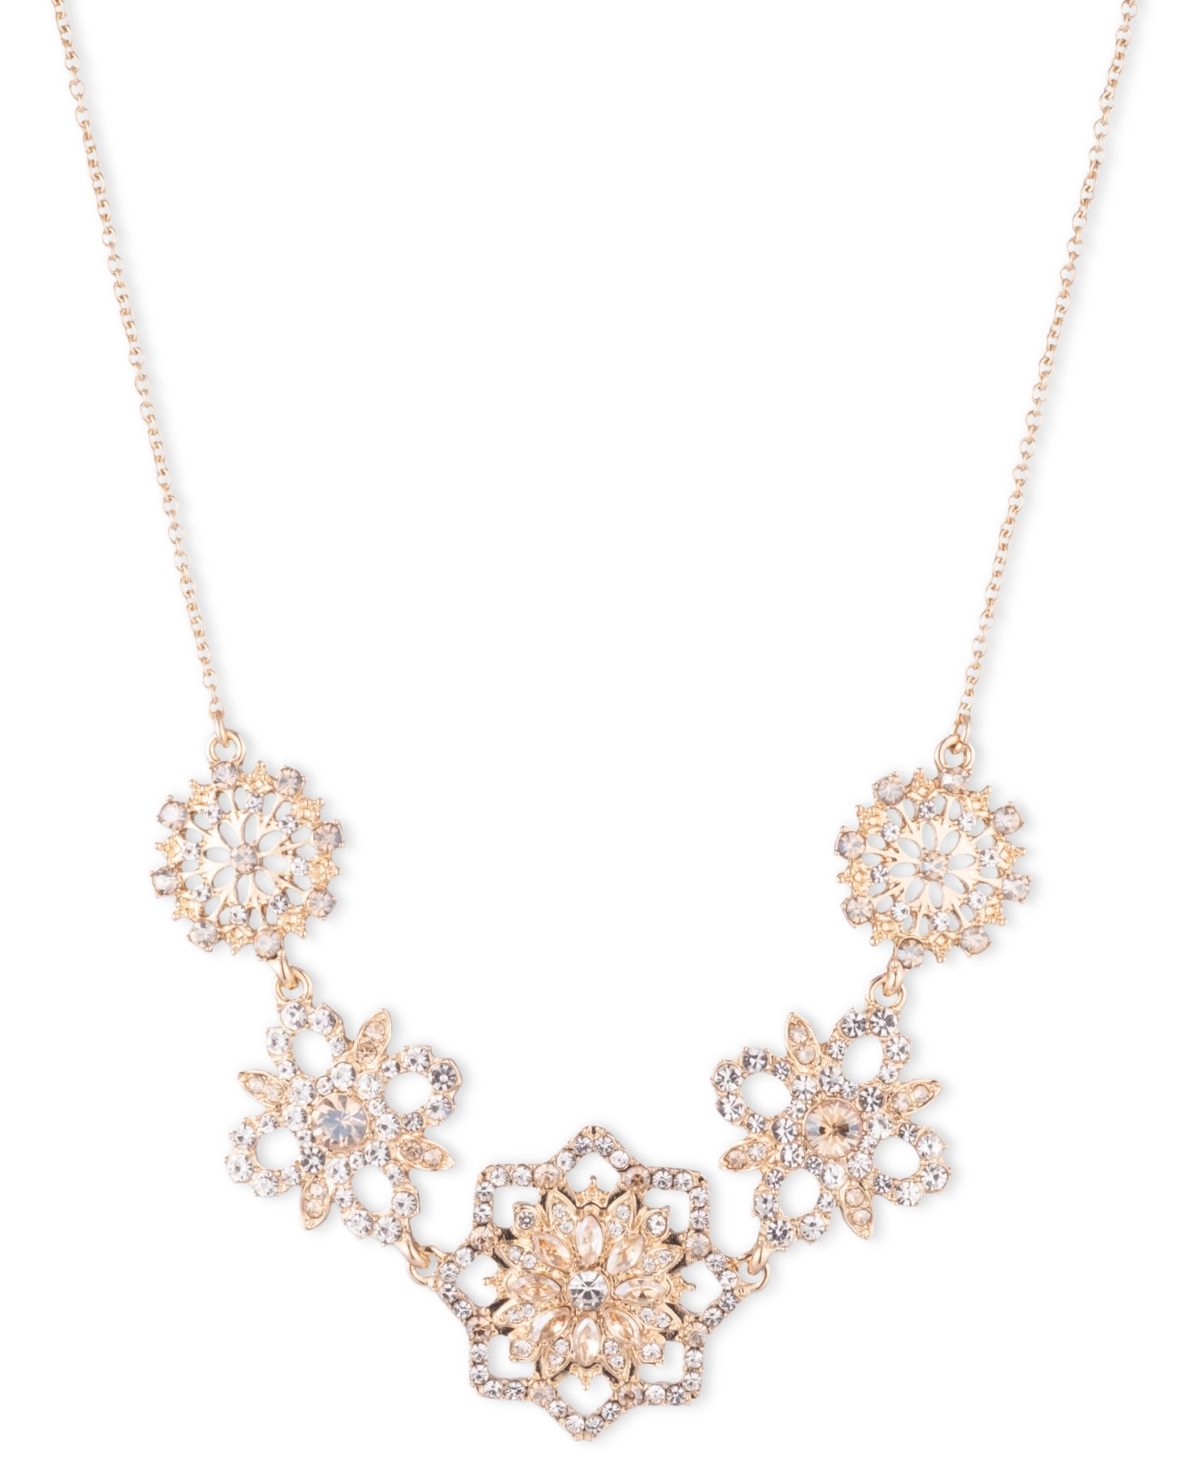 Marchesa Crystal Floral Frontal Necklace, 16" + 3" Extender In Golden